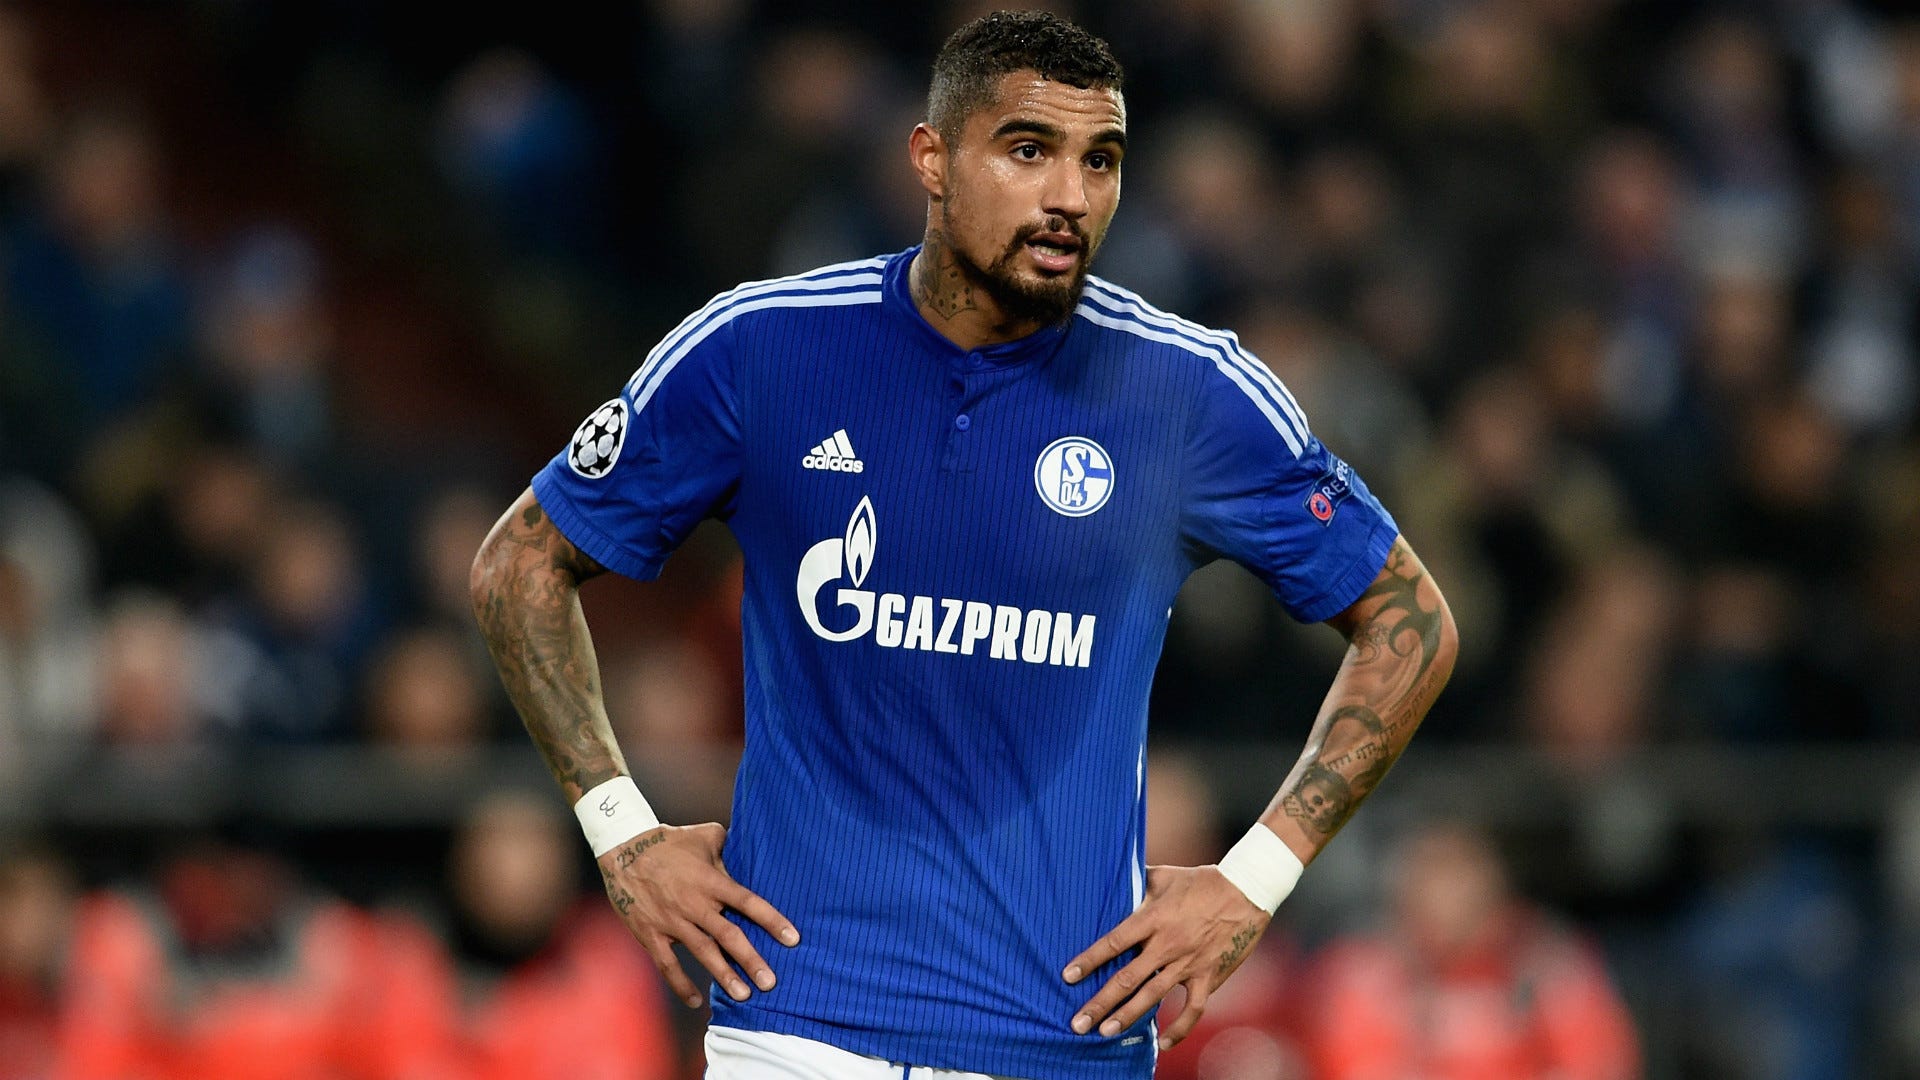 Boateng didn't give a sh*t who he played against' – Former Barcelona forward's self-confidence revealed | Goal.com United Arab Emirates